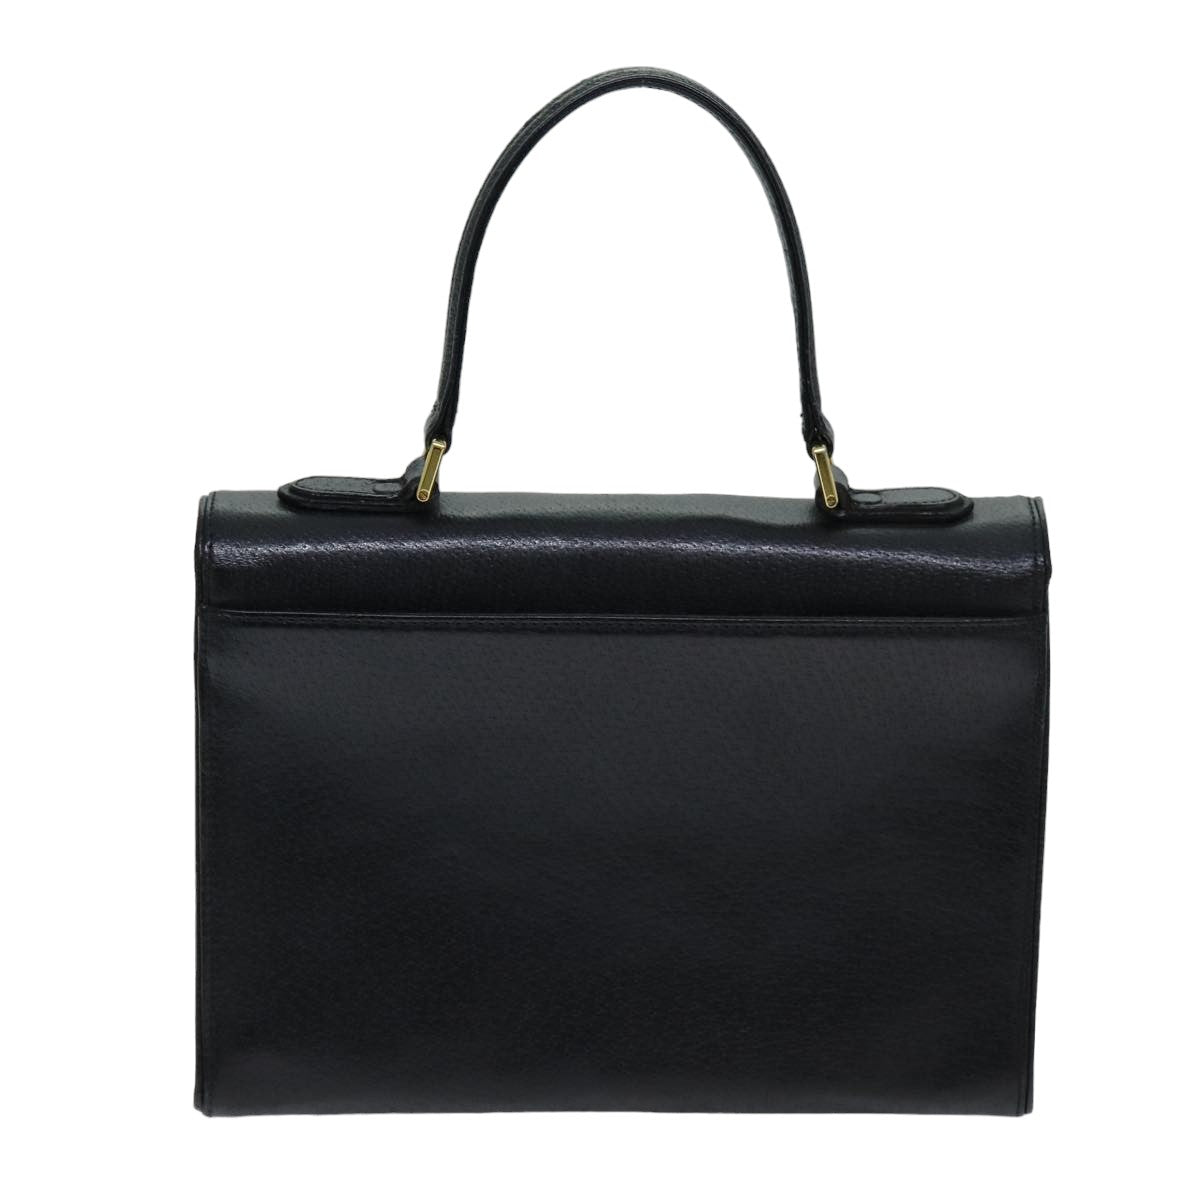 VALENTINO Hand Bag Leather Black Auth bs14654